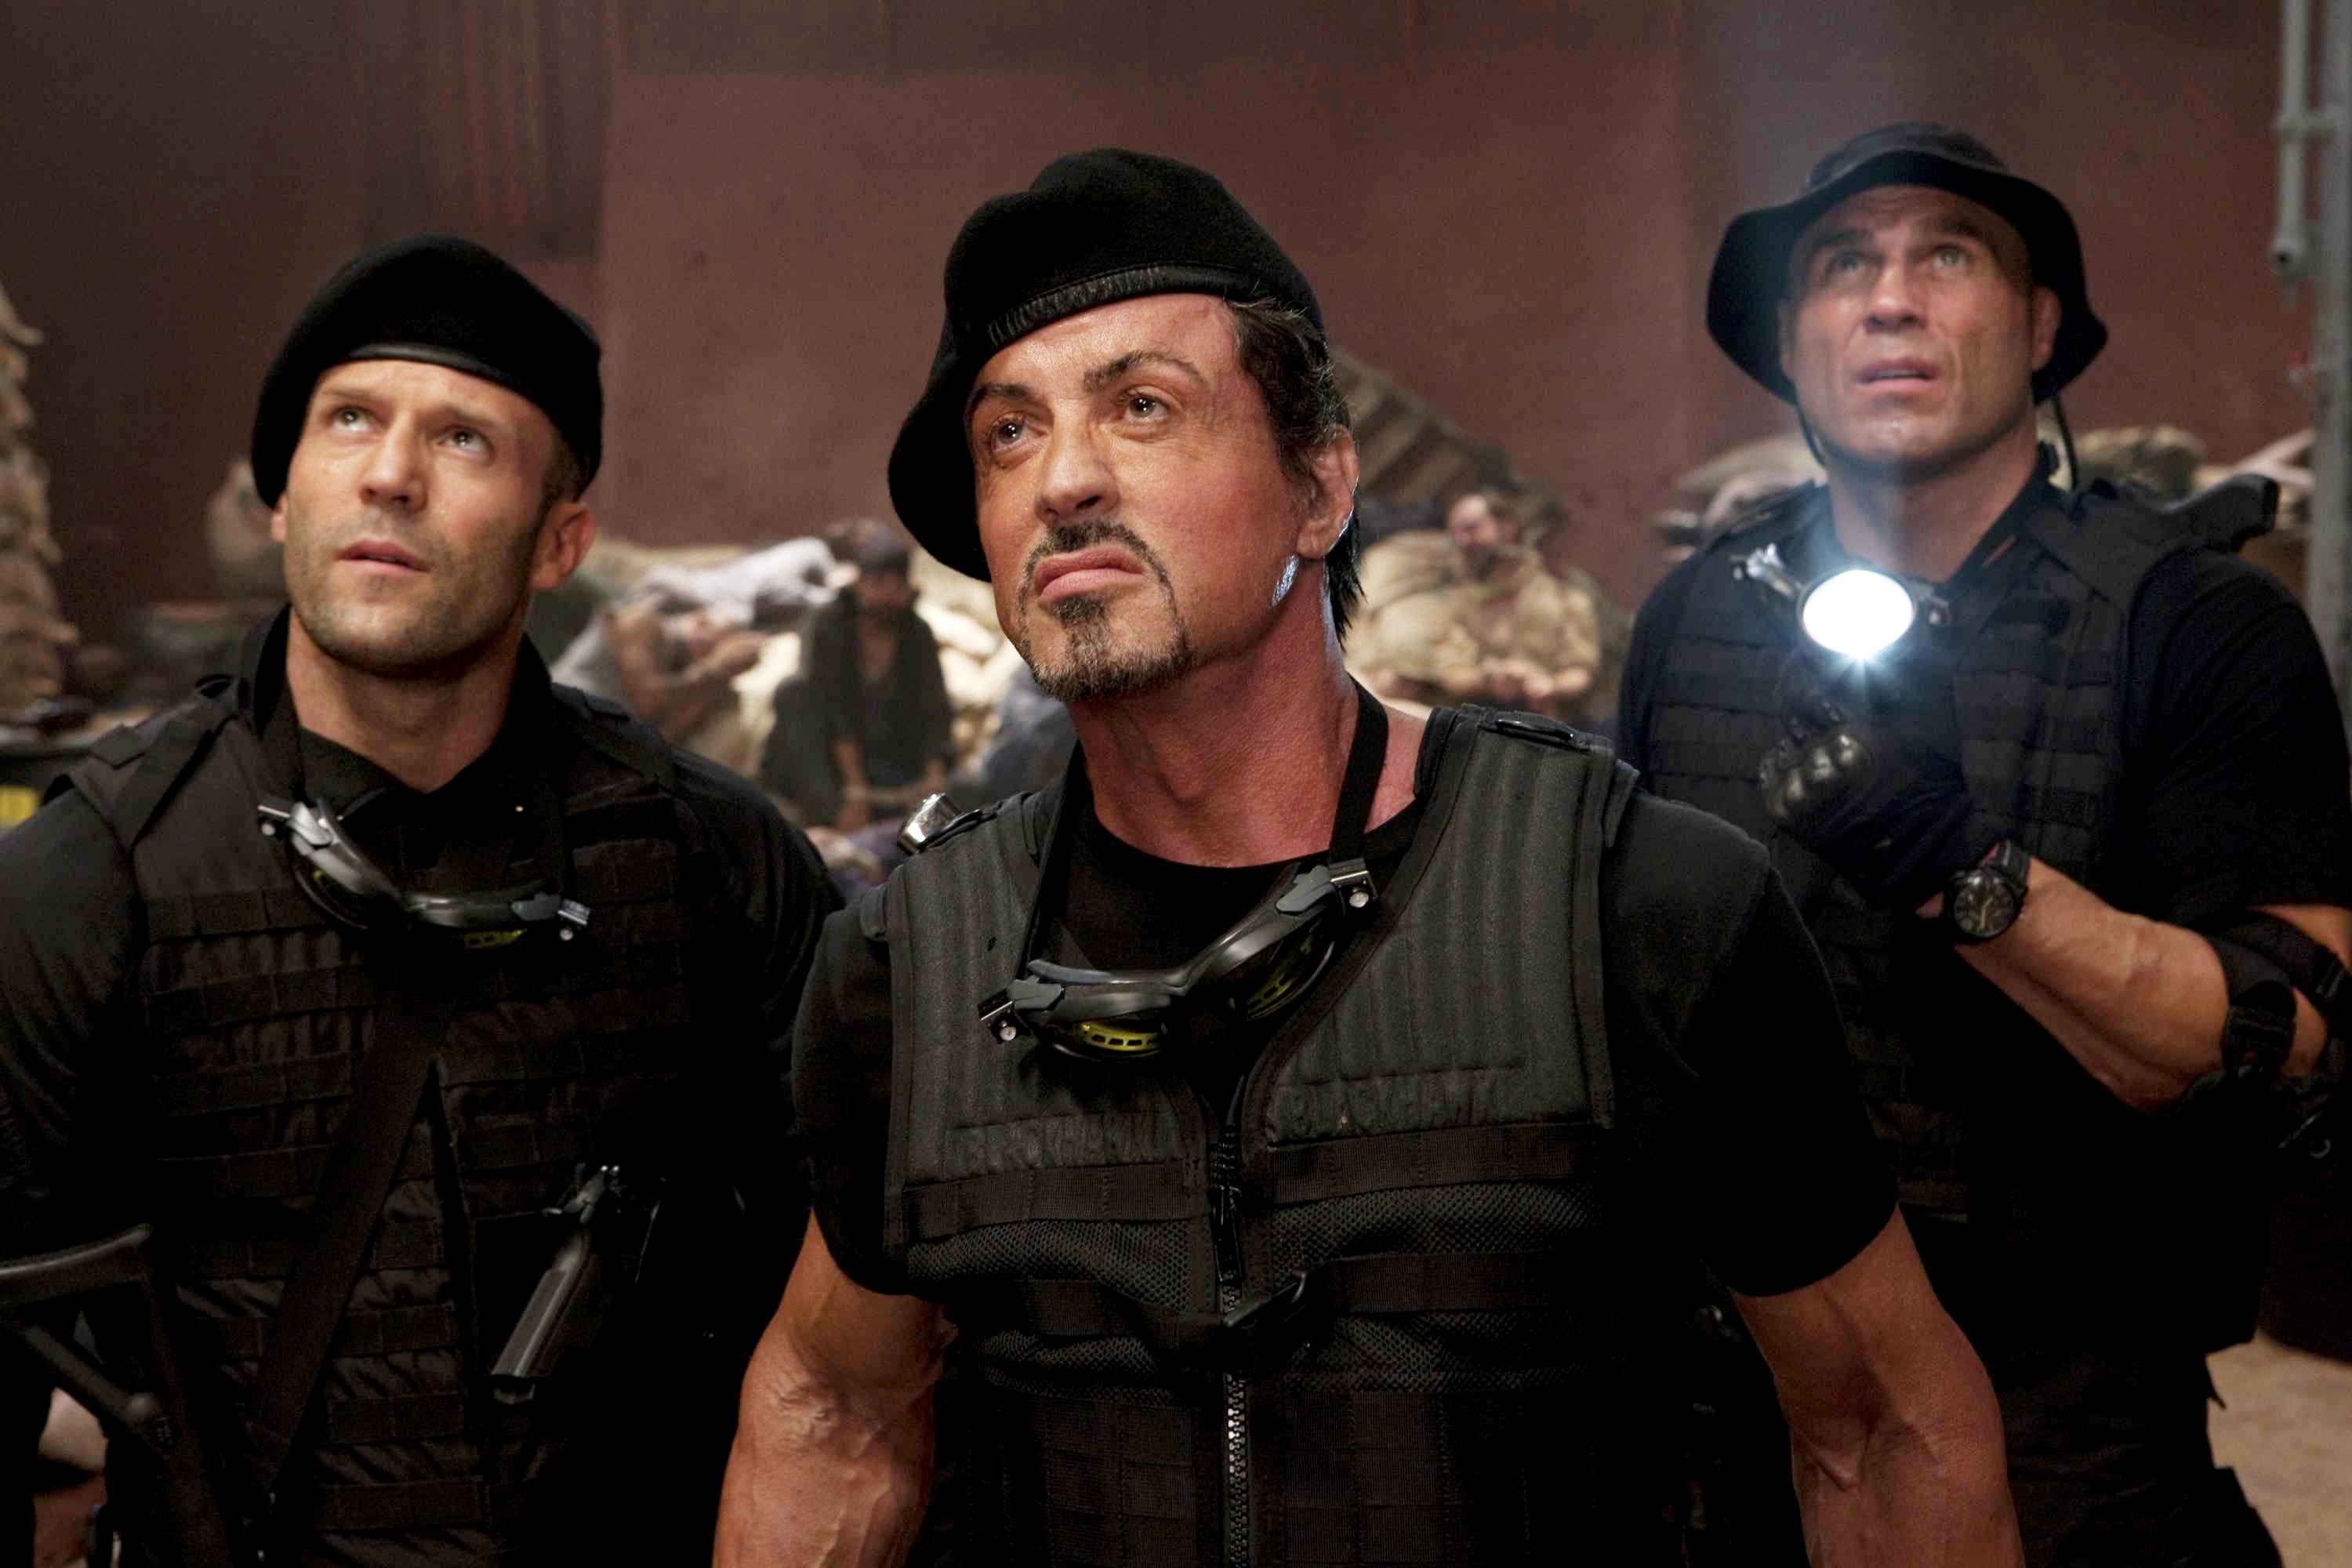 Jason Statham, Sylvester Stallone and Randy Couture in Lionsgate Films' The Expendables (2010). Photo credit by Karen Ballard.